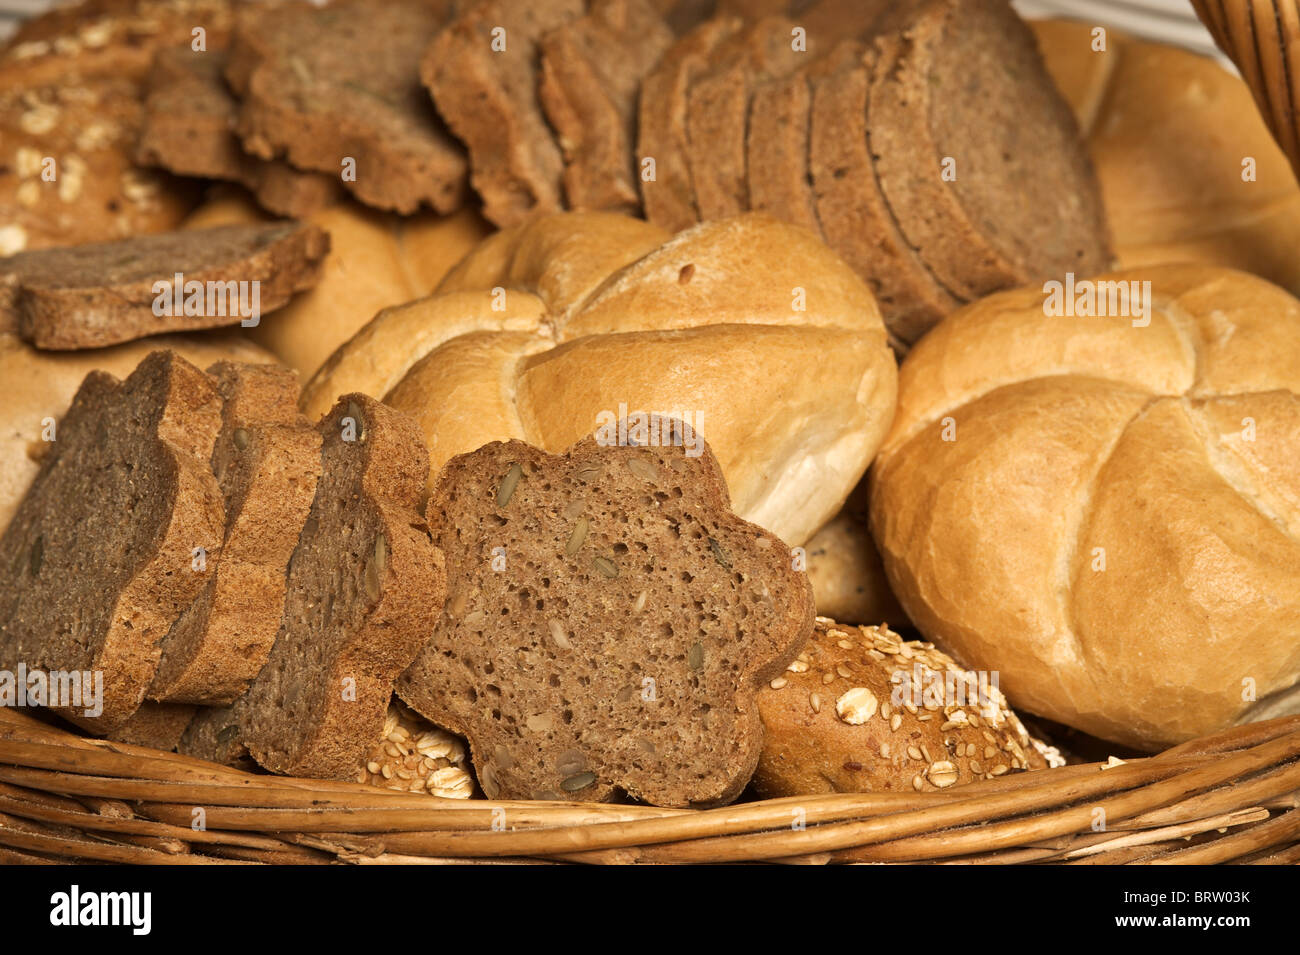 Bread and rolls Stock Photo